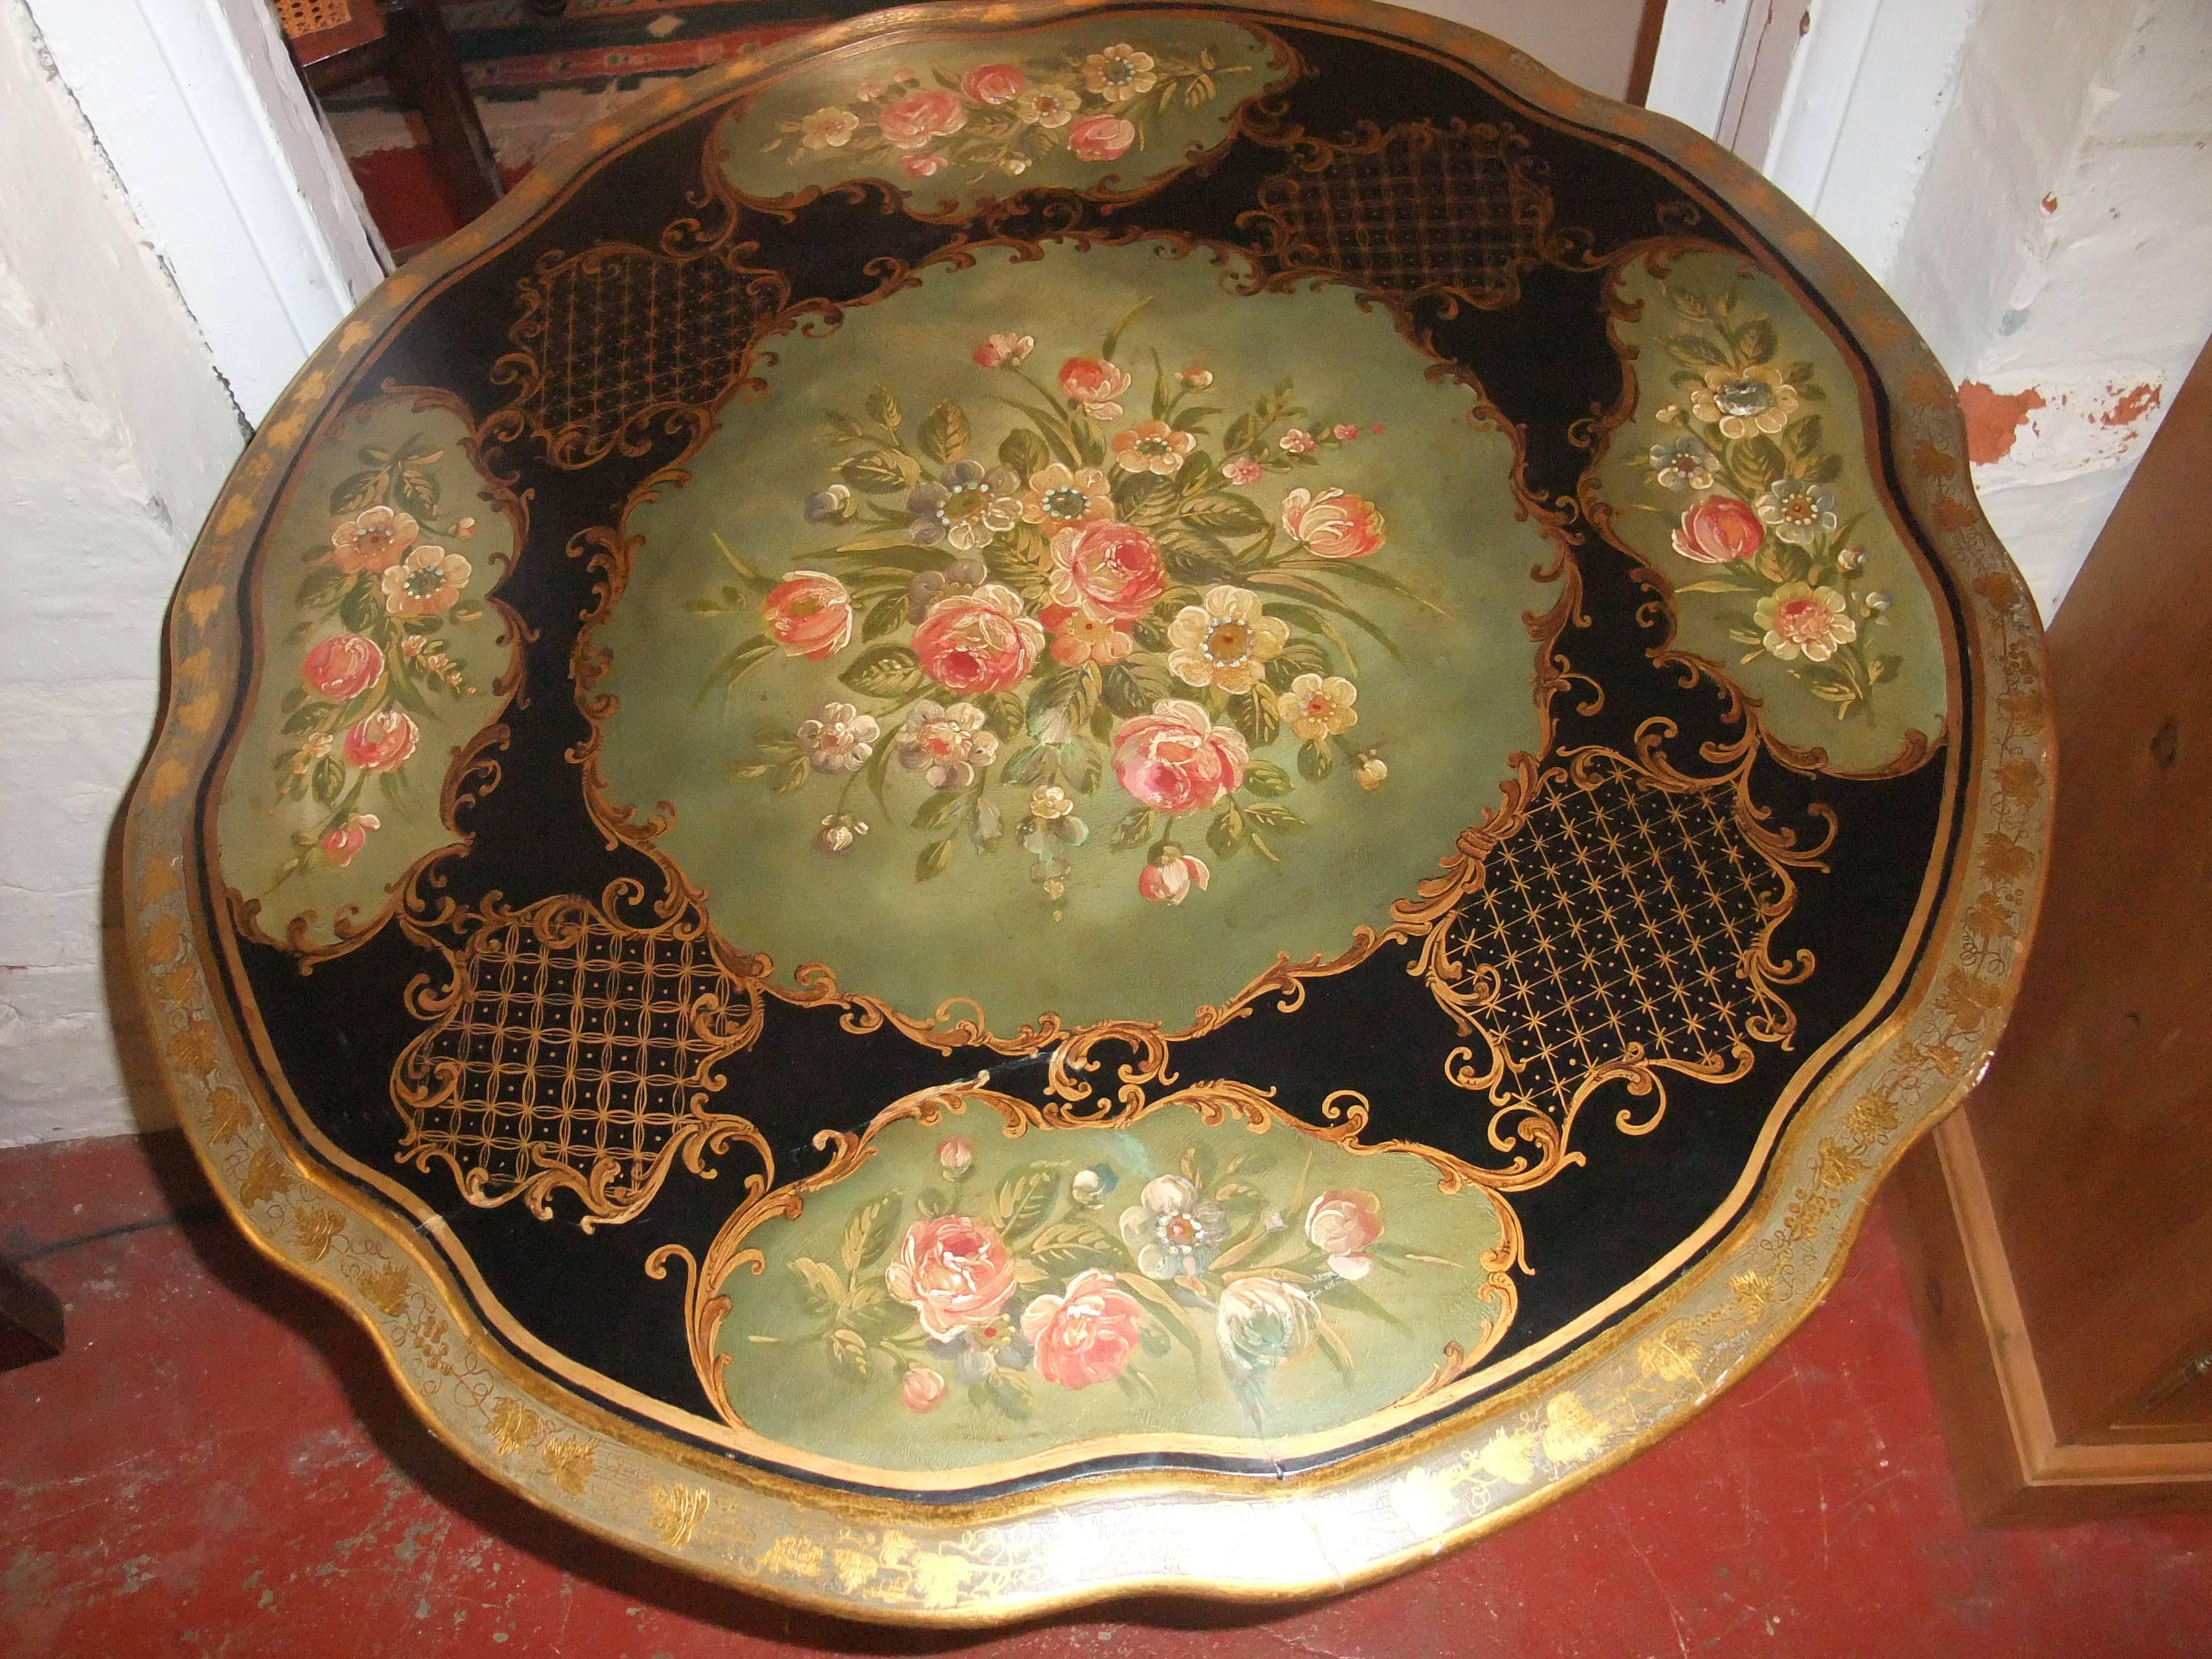 This is a stunning table in the mid-19th century Spanish style with a tilt-top design designed to save space when not in use; this is consistent with much of the furniture from the time that would be moved to the side of the room when not